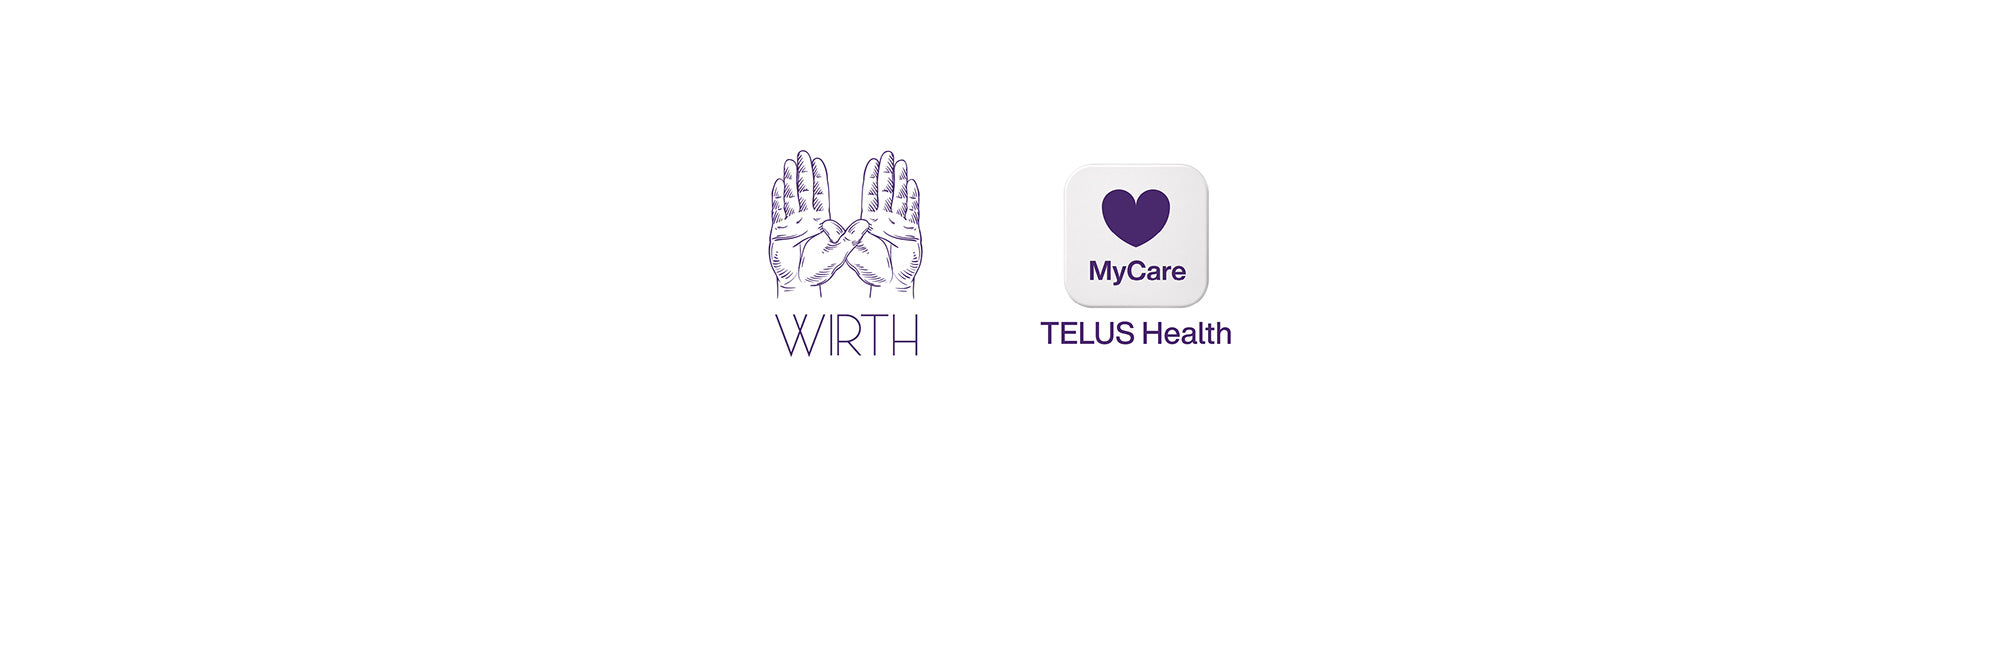 WIRTH Hats Providing Mental Health Support to Canadians through Proceeds from Sales